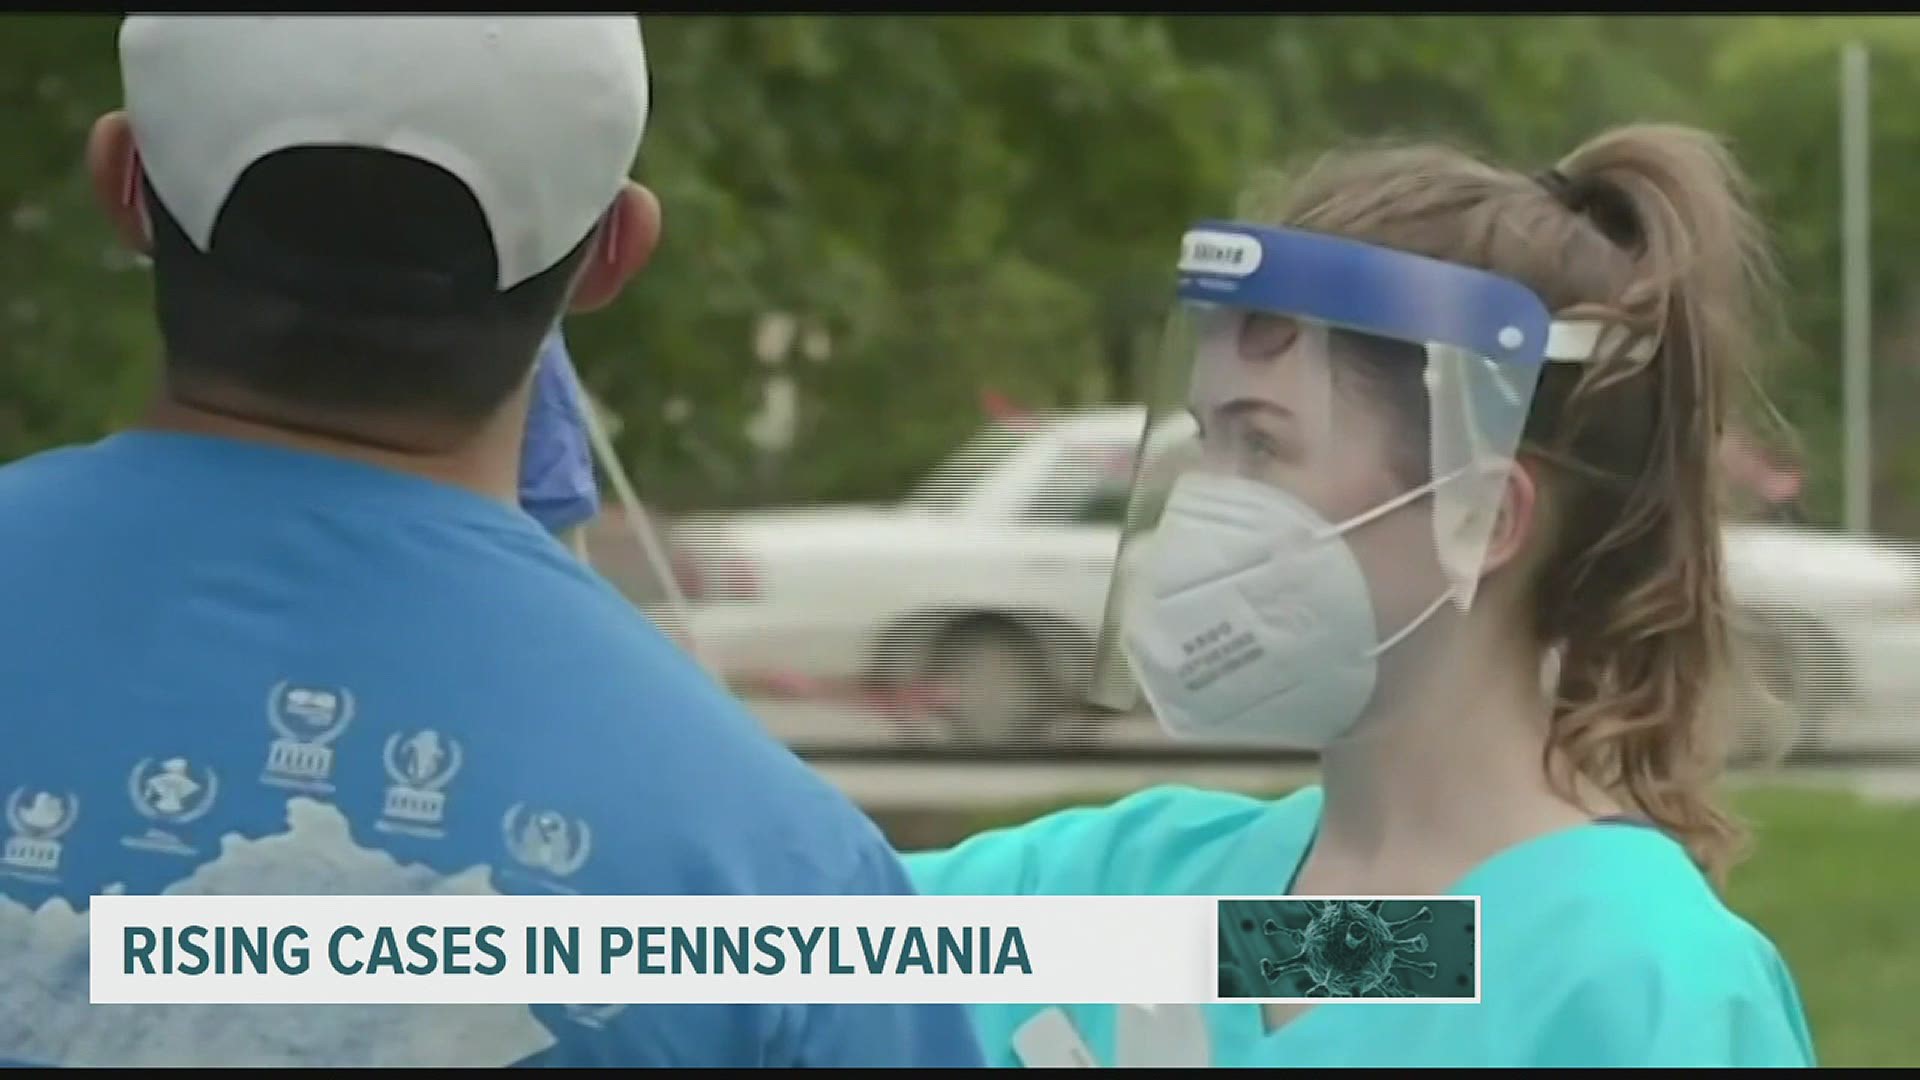 The PA Secretary of Health reminds everyone to take precautions including social distancing and wearing masks